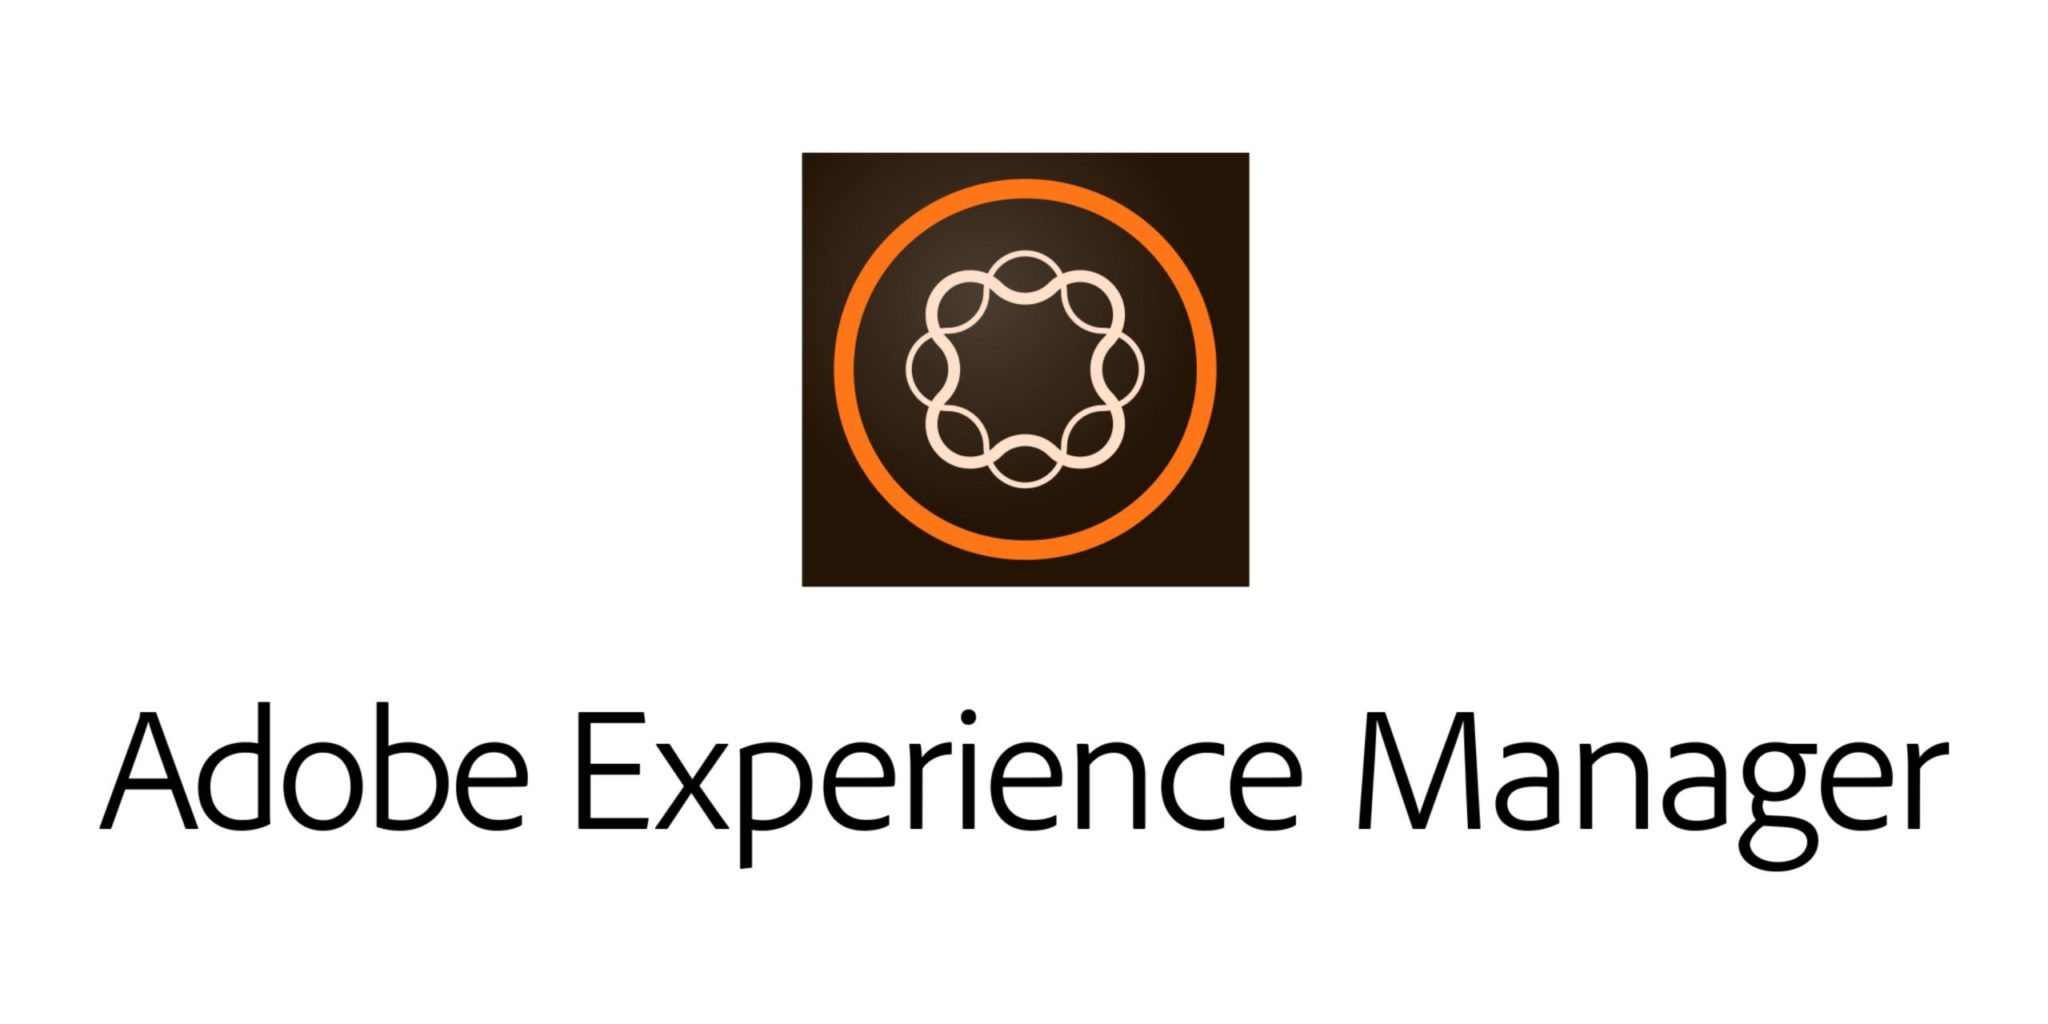 Comment rendre AEM (Adobe Experience Manager) SEO Friendly ? (partie 1)